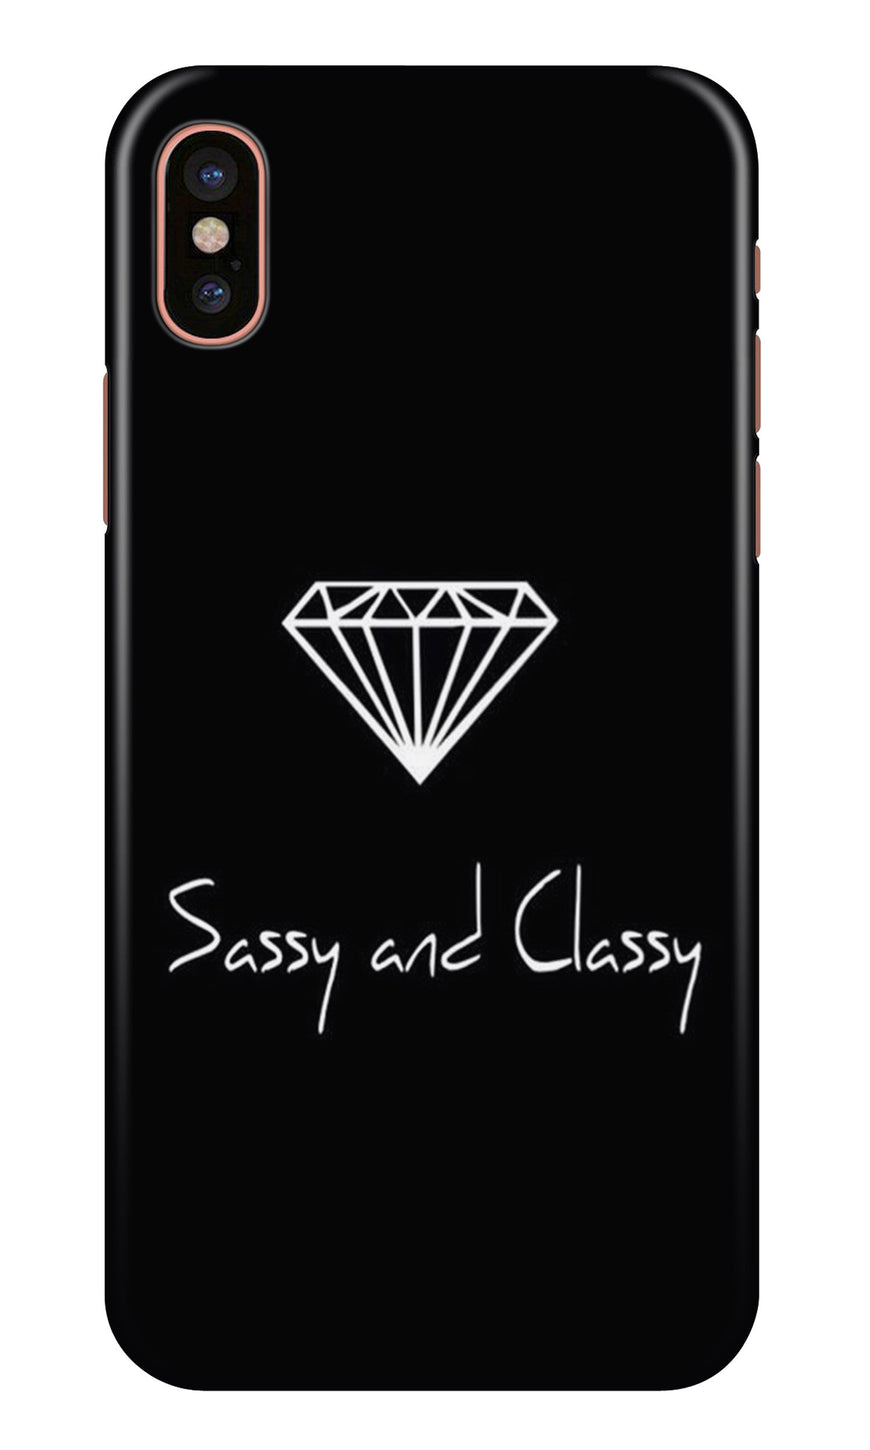 Sassy and Classy Case for iPhone Xr (Design No. 264)